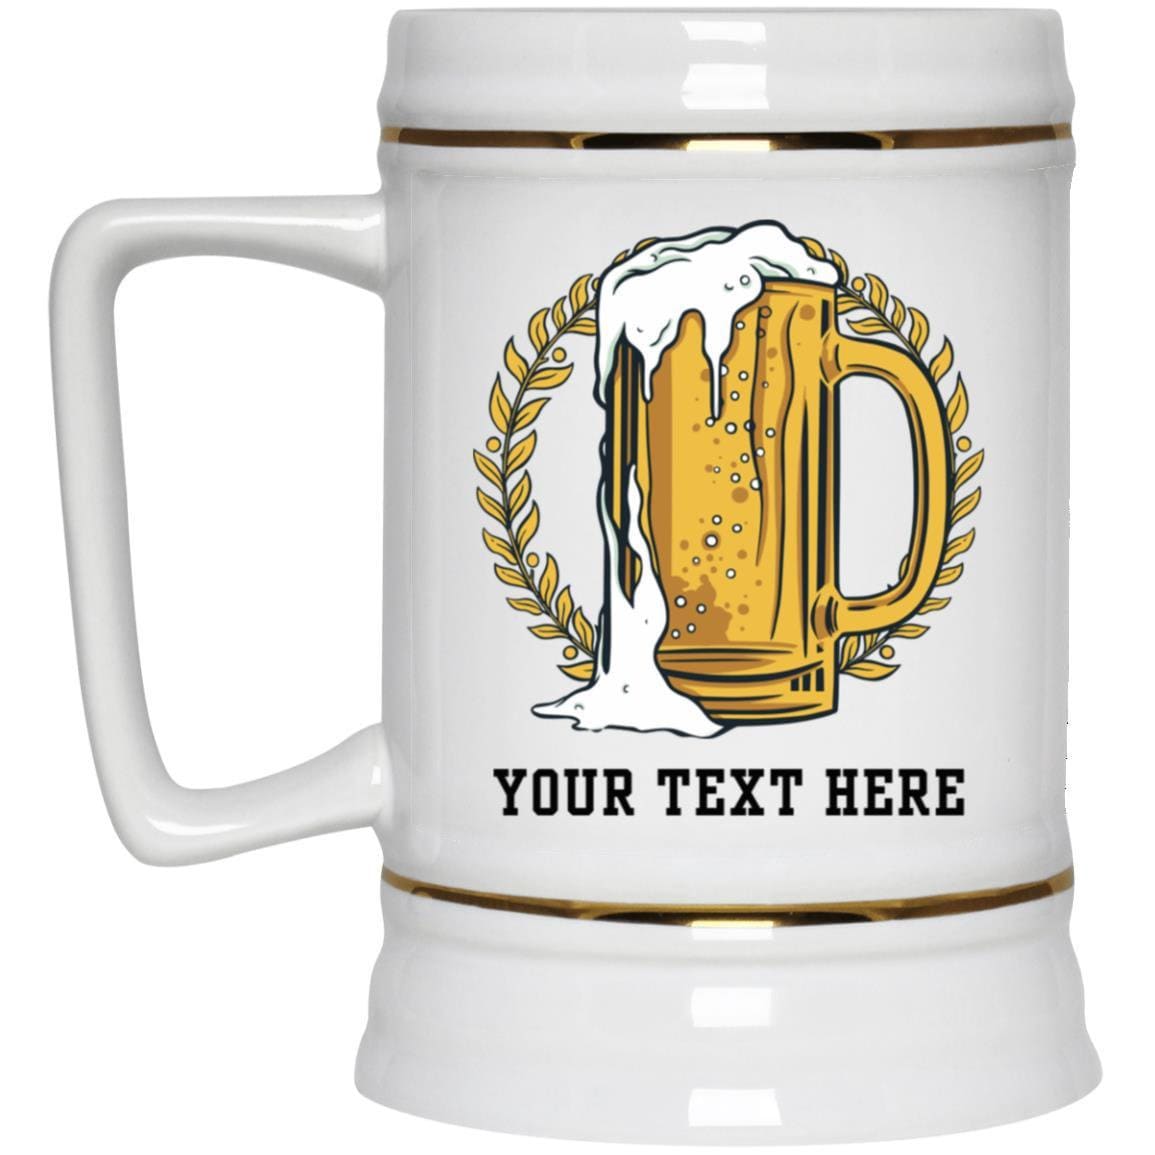 Stanley Ceramivac Personalized Beer Stein 24 Oz, Perfect Custom